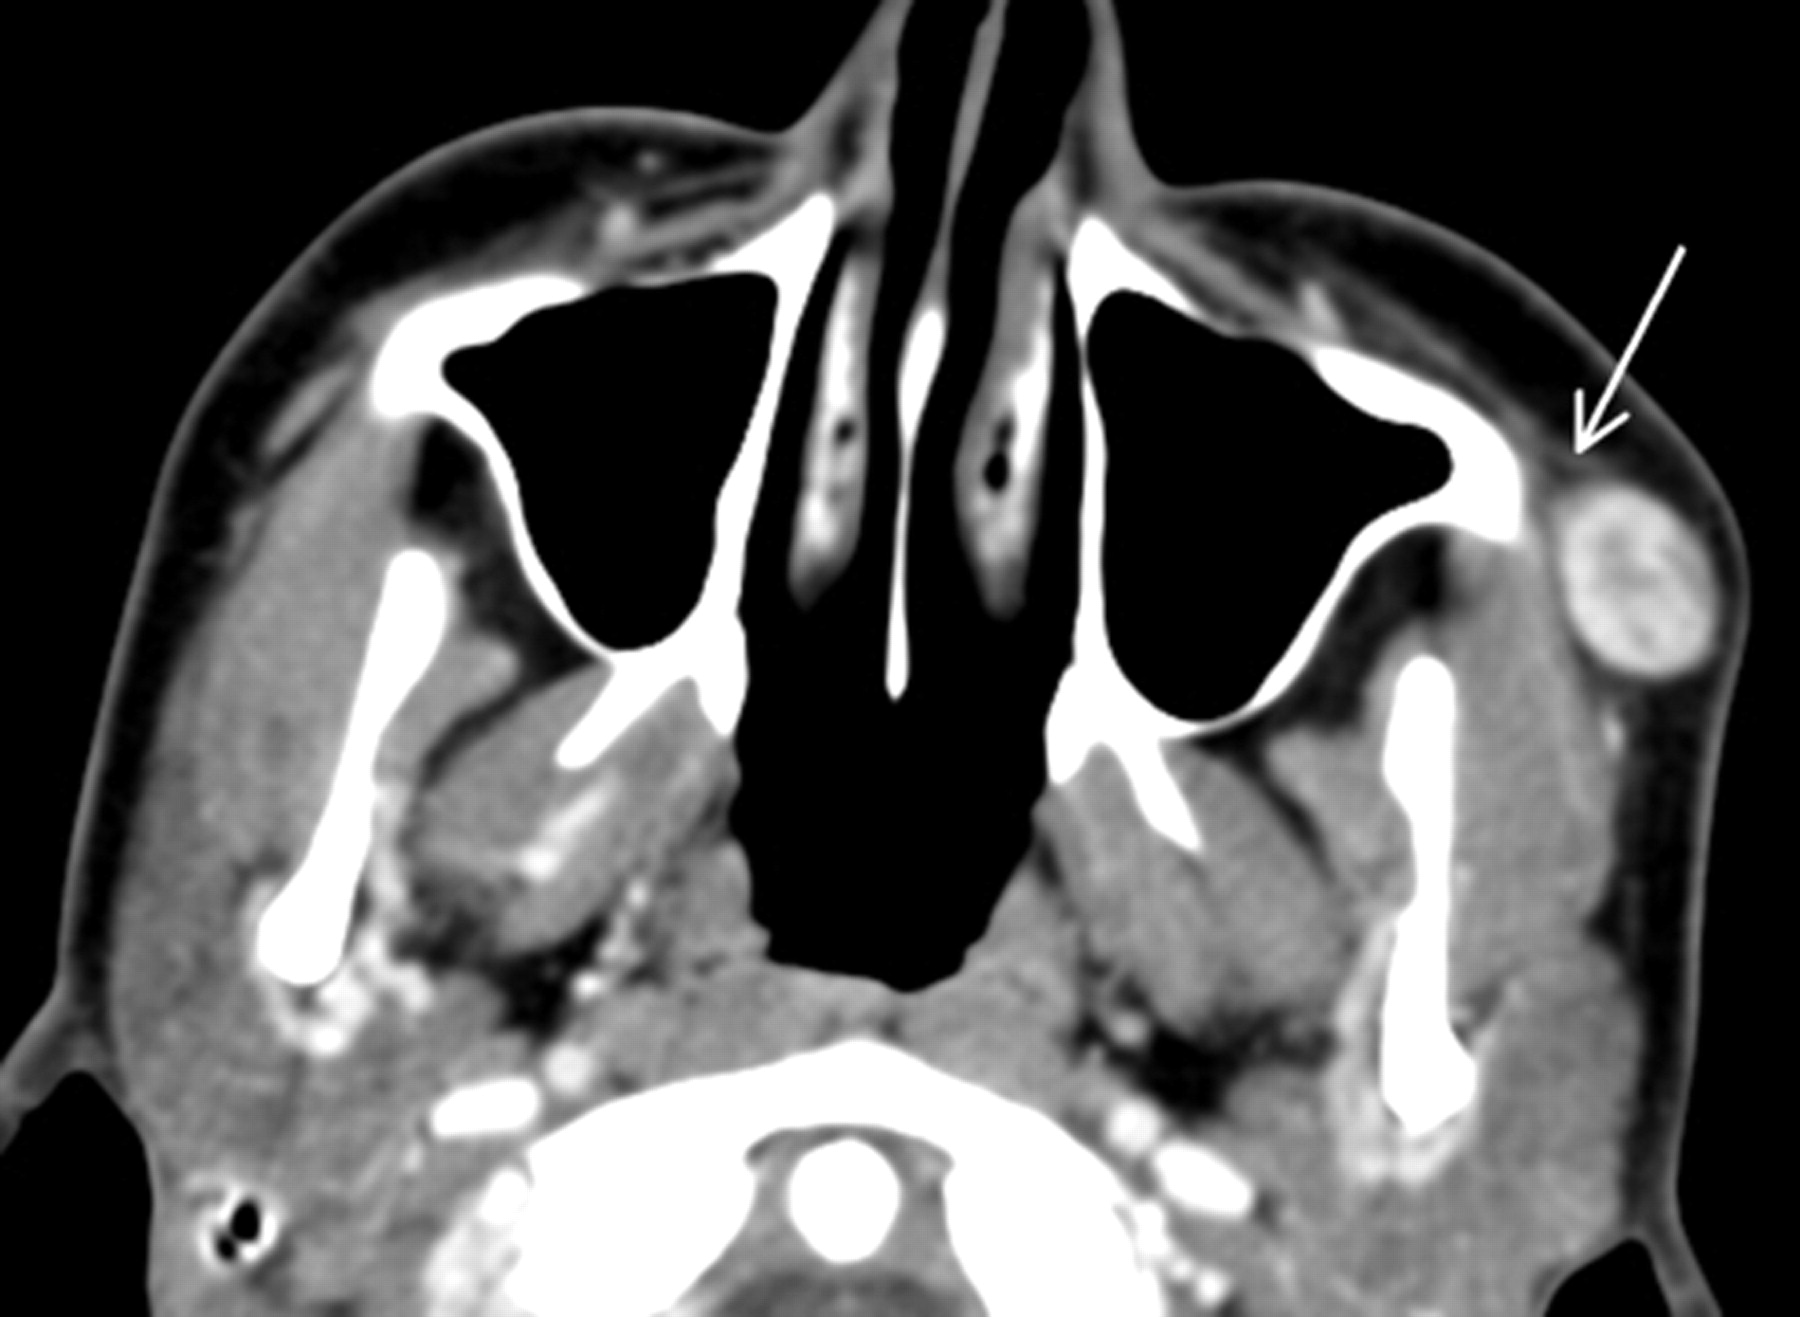 Nodular Fasciitis in the Head and Neck: CT and MR Imaging Findings